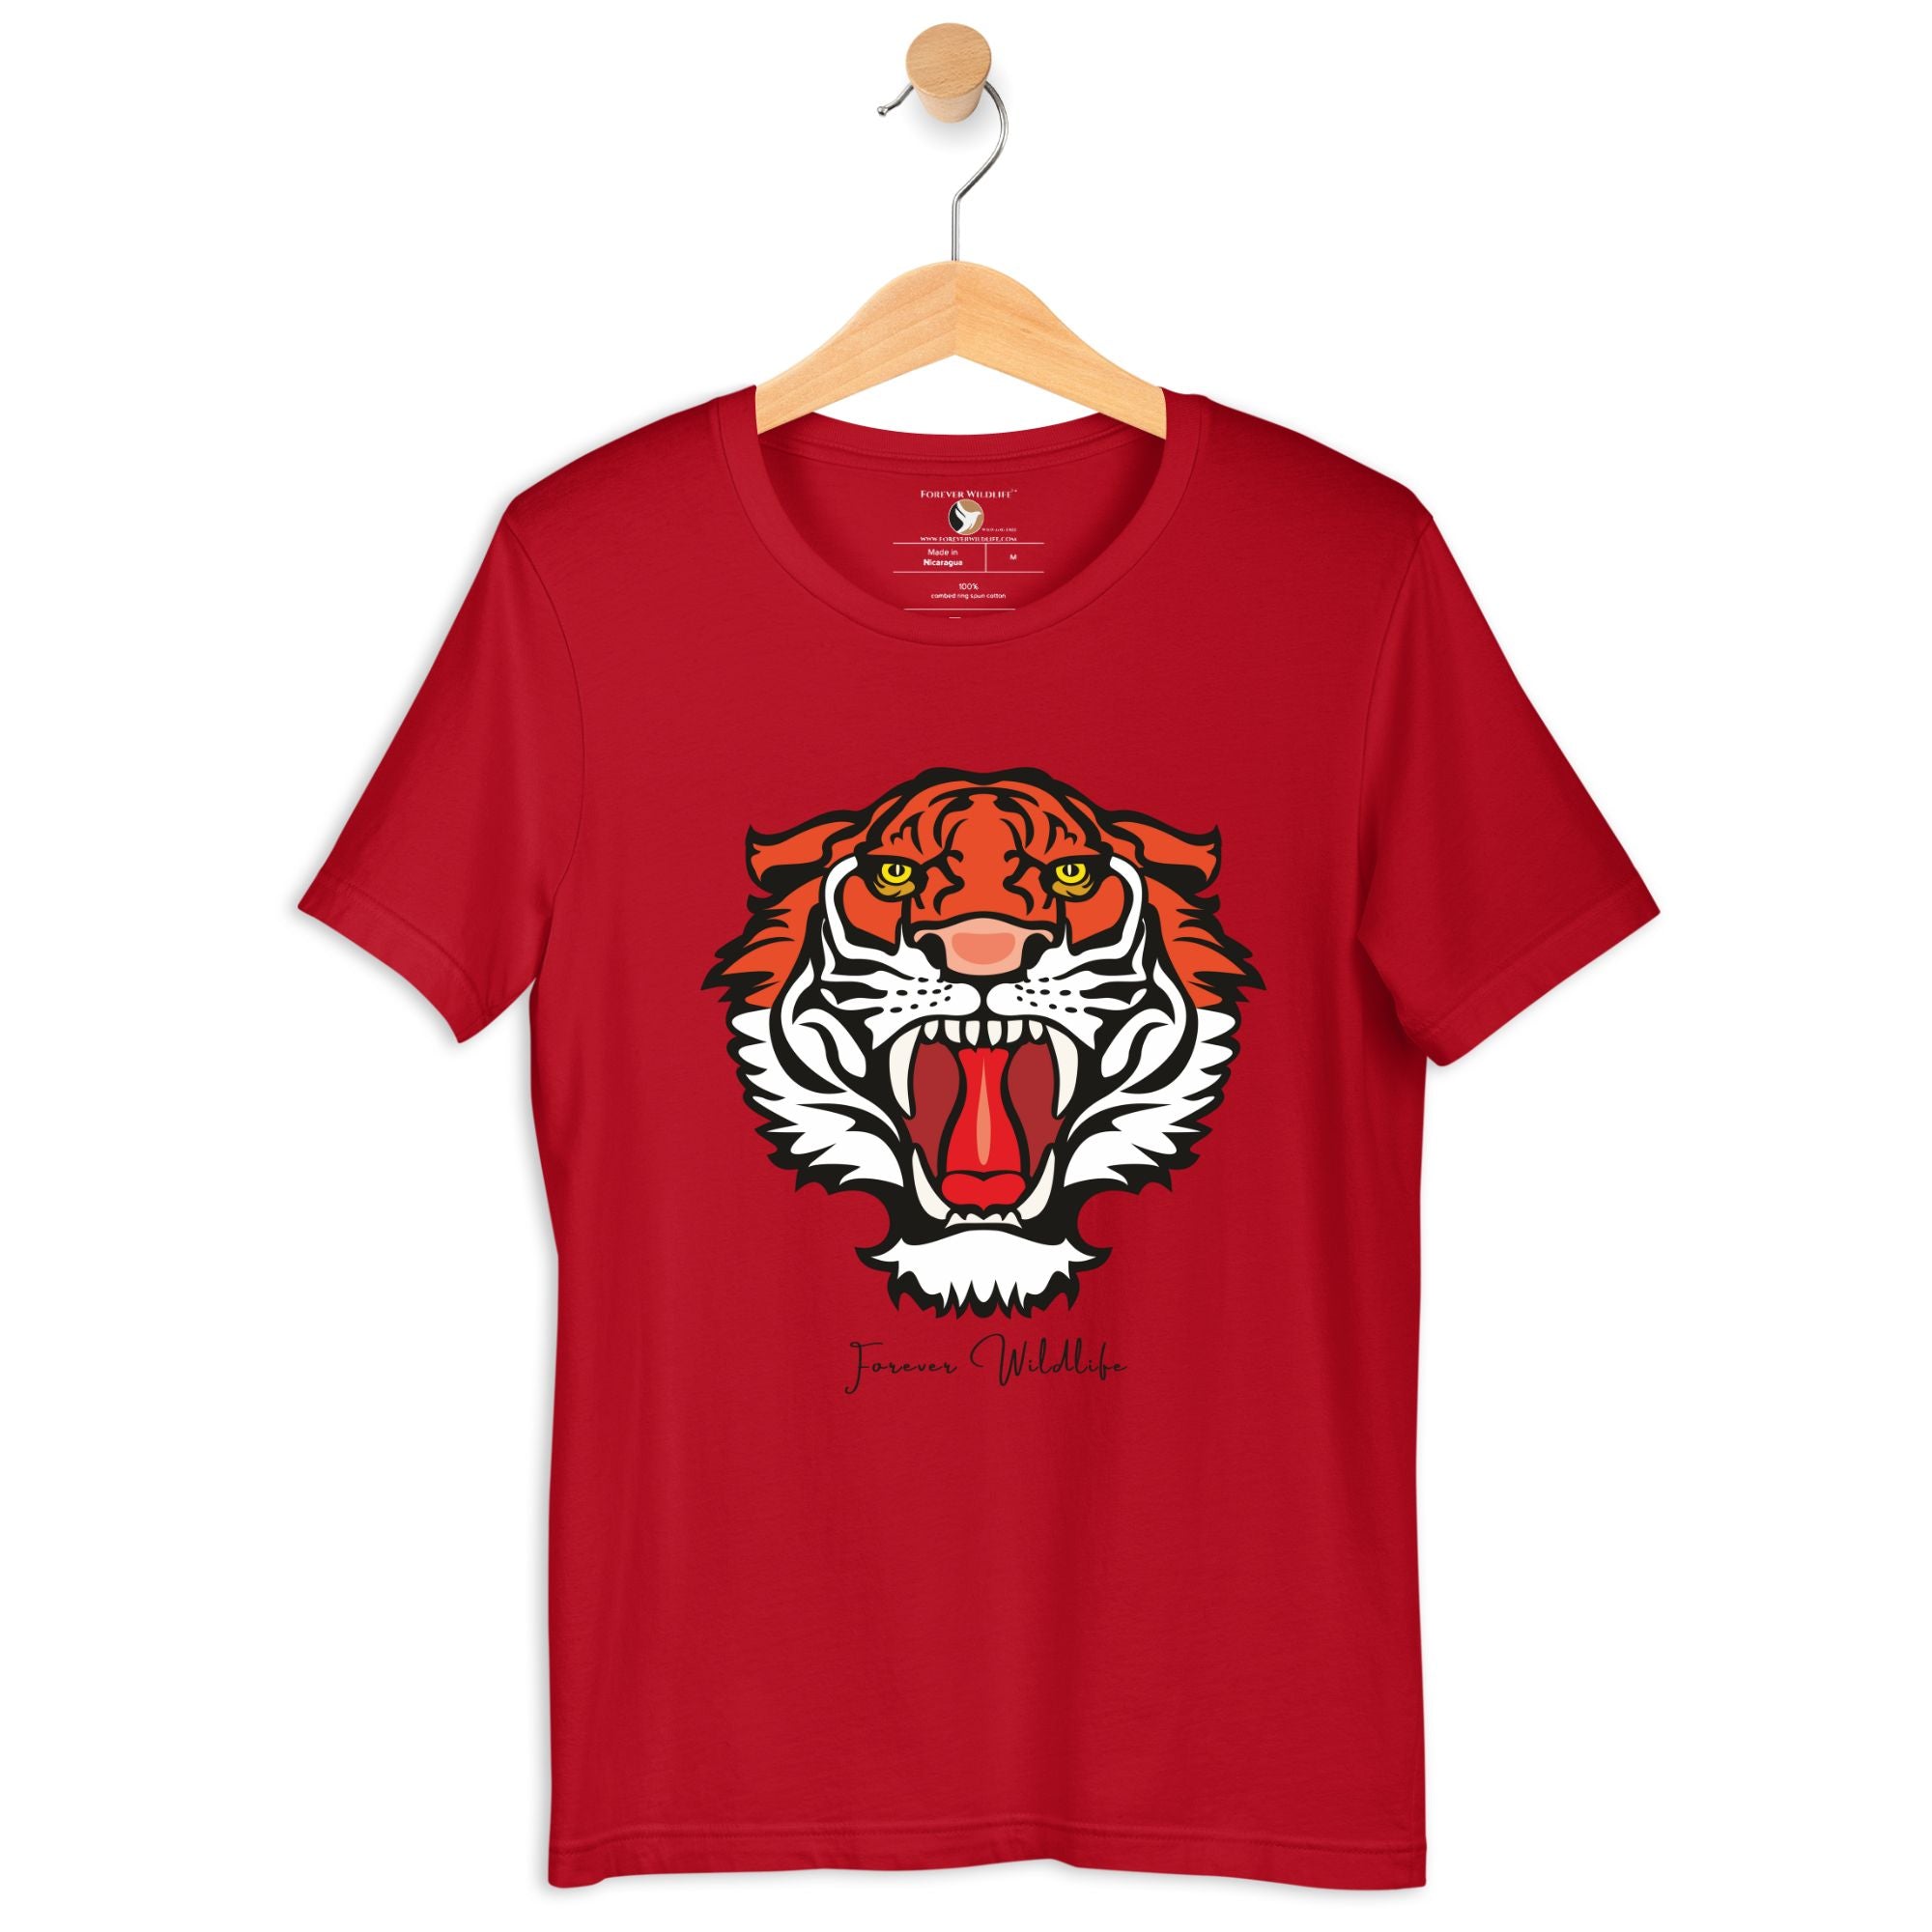 Tiger T-Shirt in Red – Premium Wildlife T-Shirt Design, Wildlife T-Shirts & Clothing from Forever Wildlife